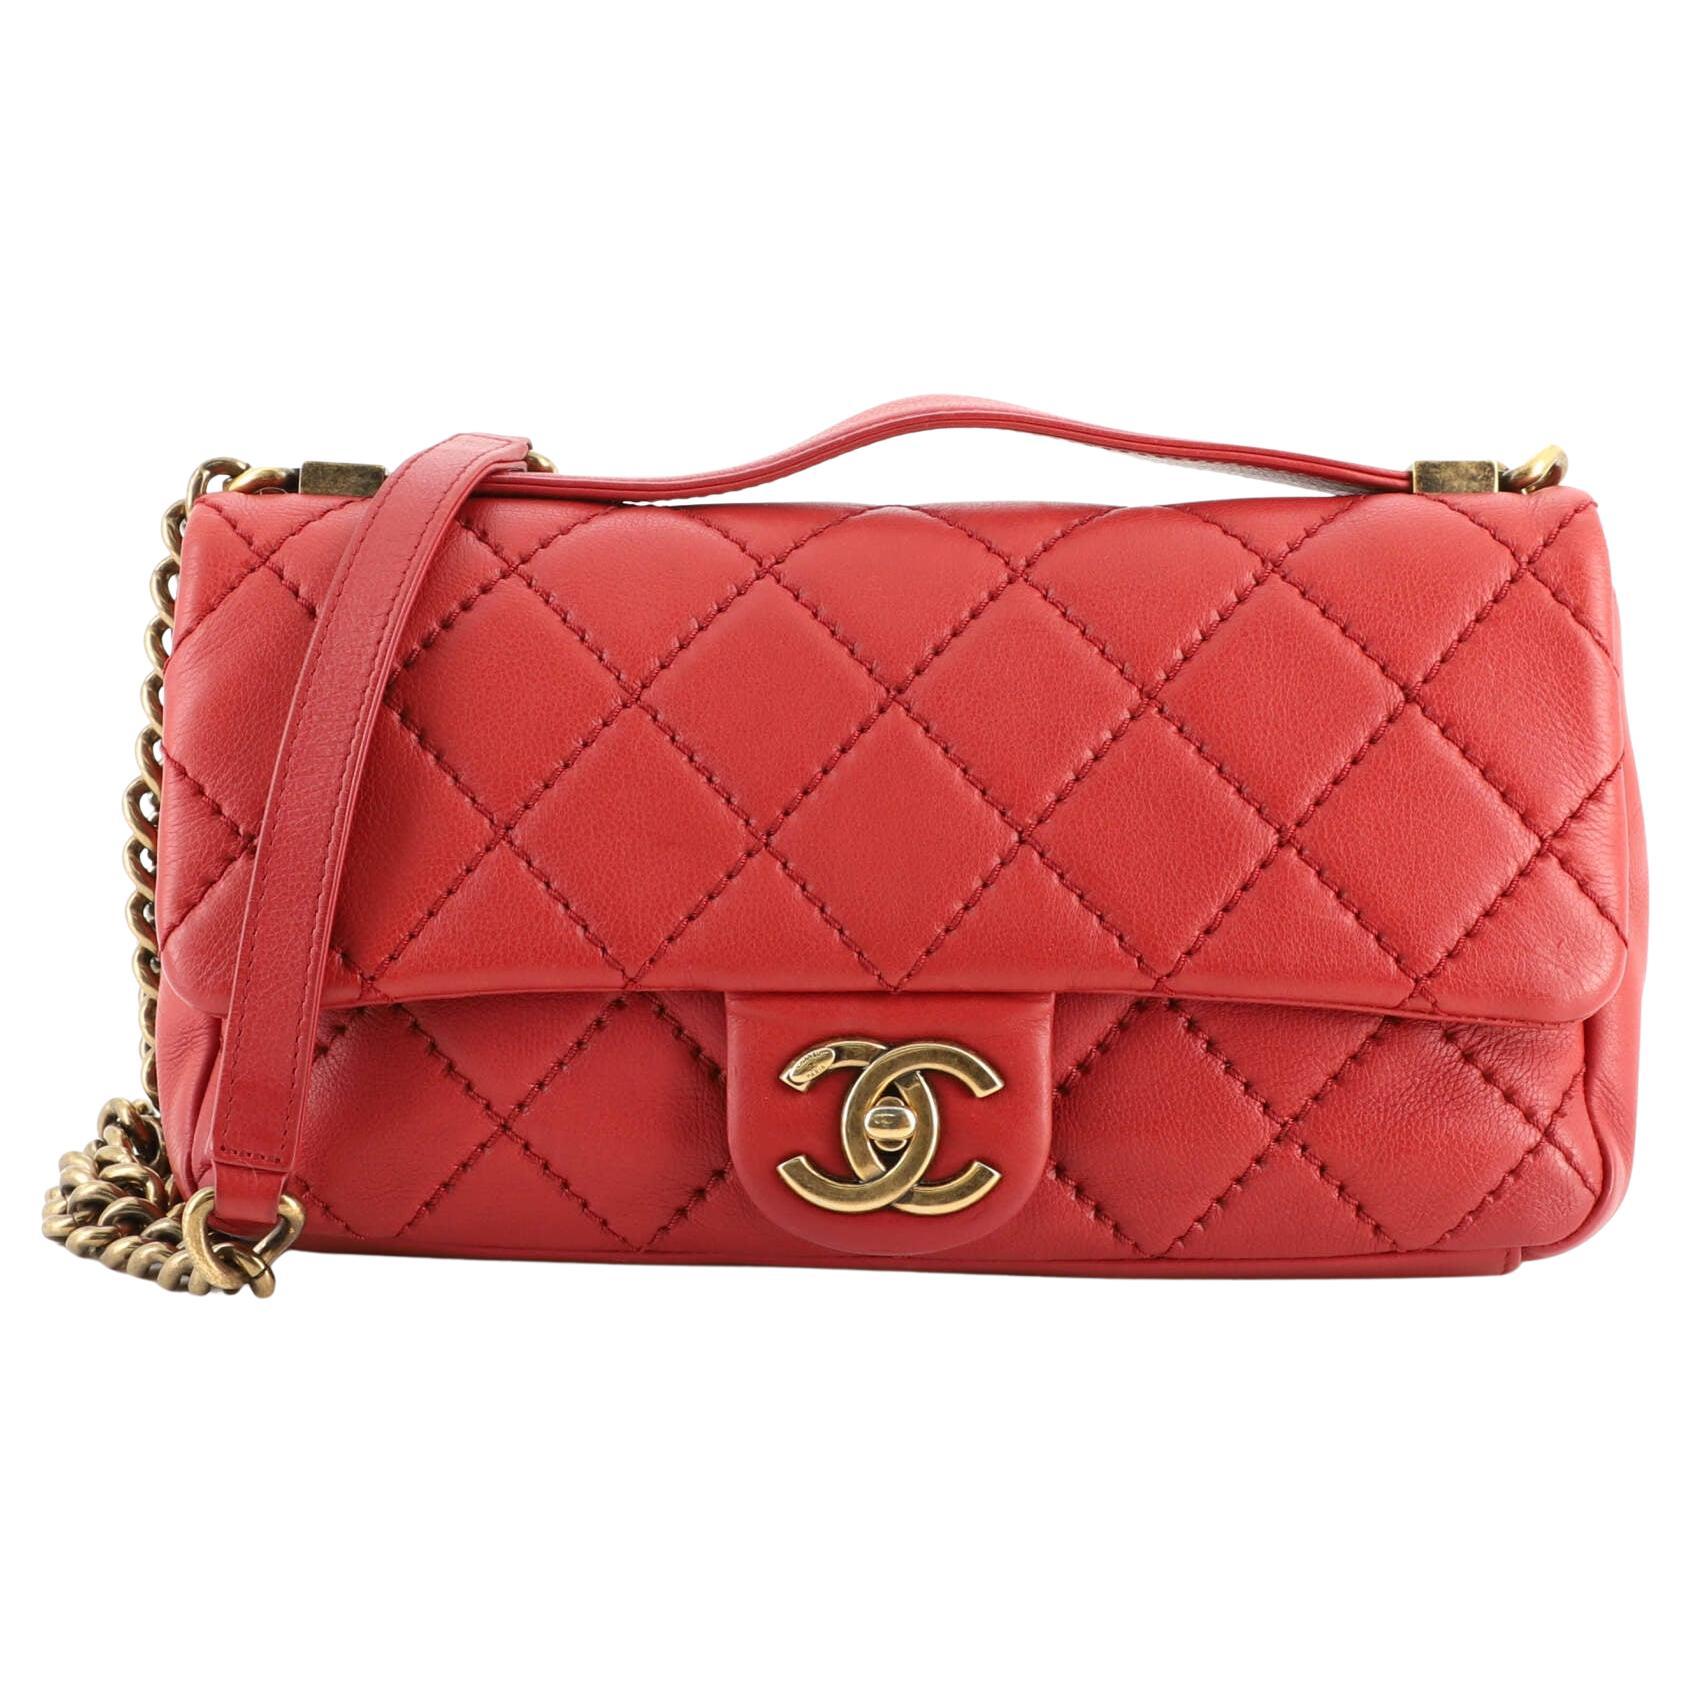 Chanel Classic Double Flap Bag Quilted Metallic Caviar Medium